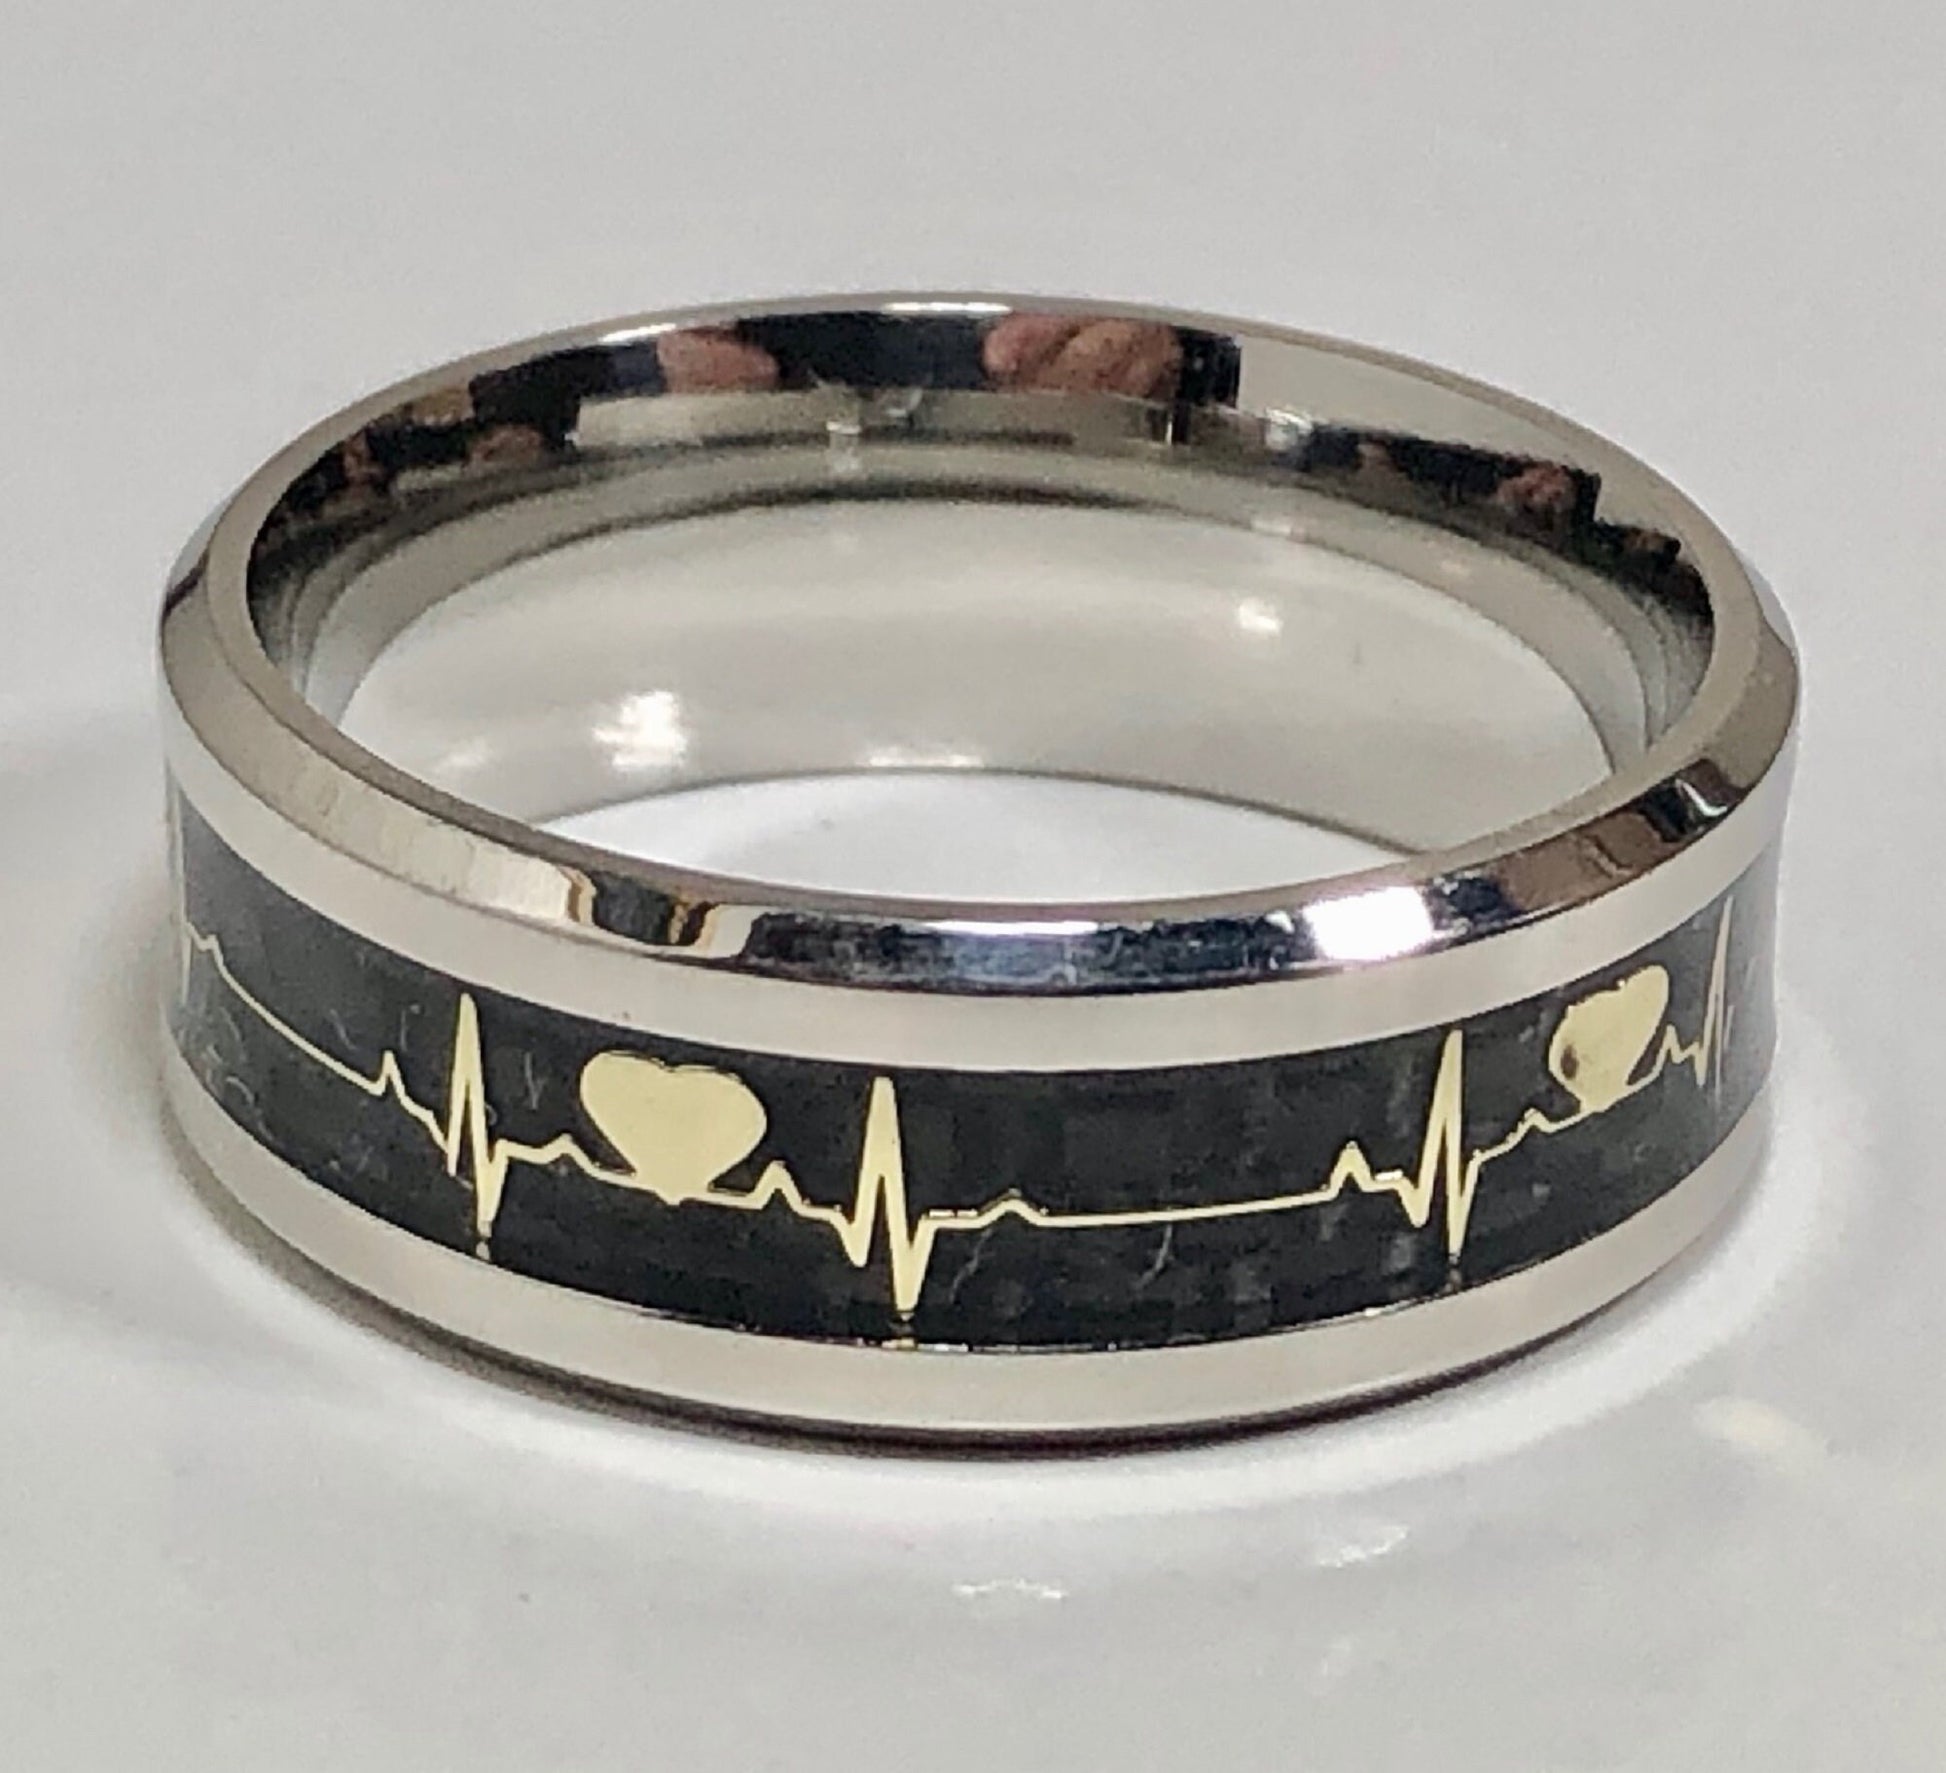 His and Her Stainless Steel Electrocardiogram Ring (ECG) Promise Heartbeat Ring - Anniversary & Wedding - Friendship - Anytime -Cardiologist